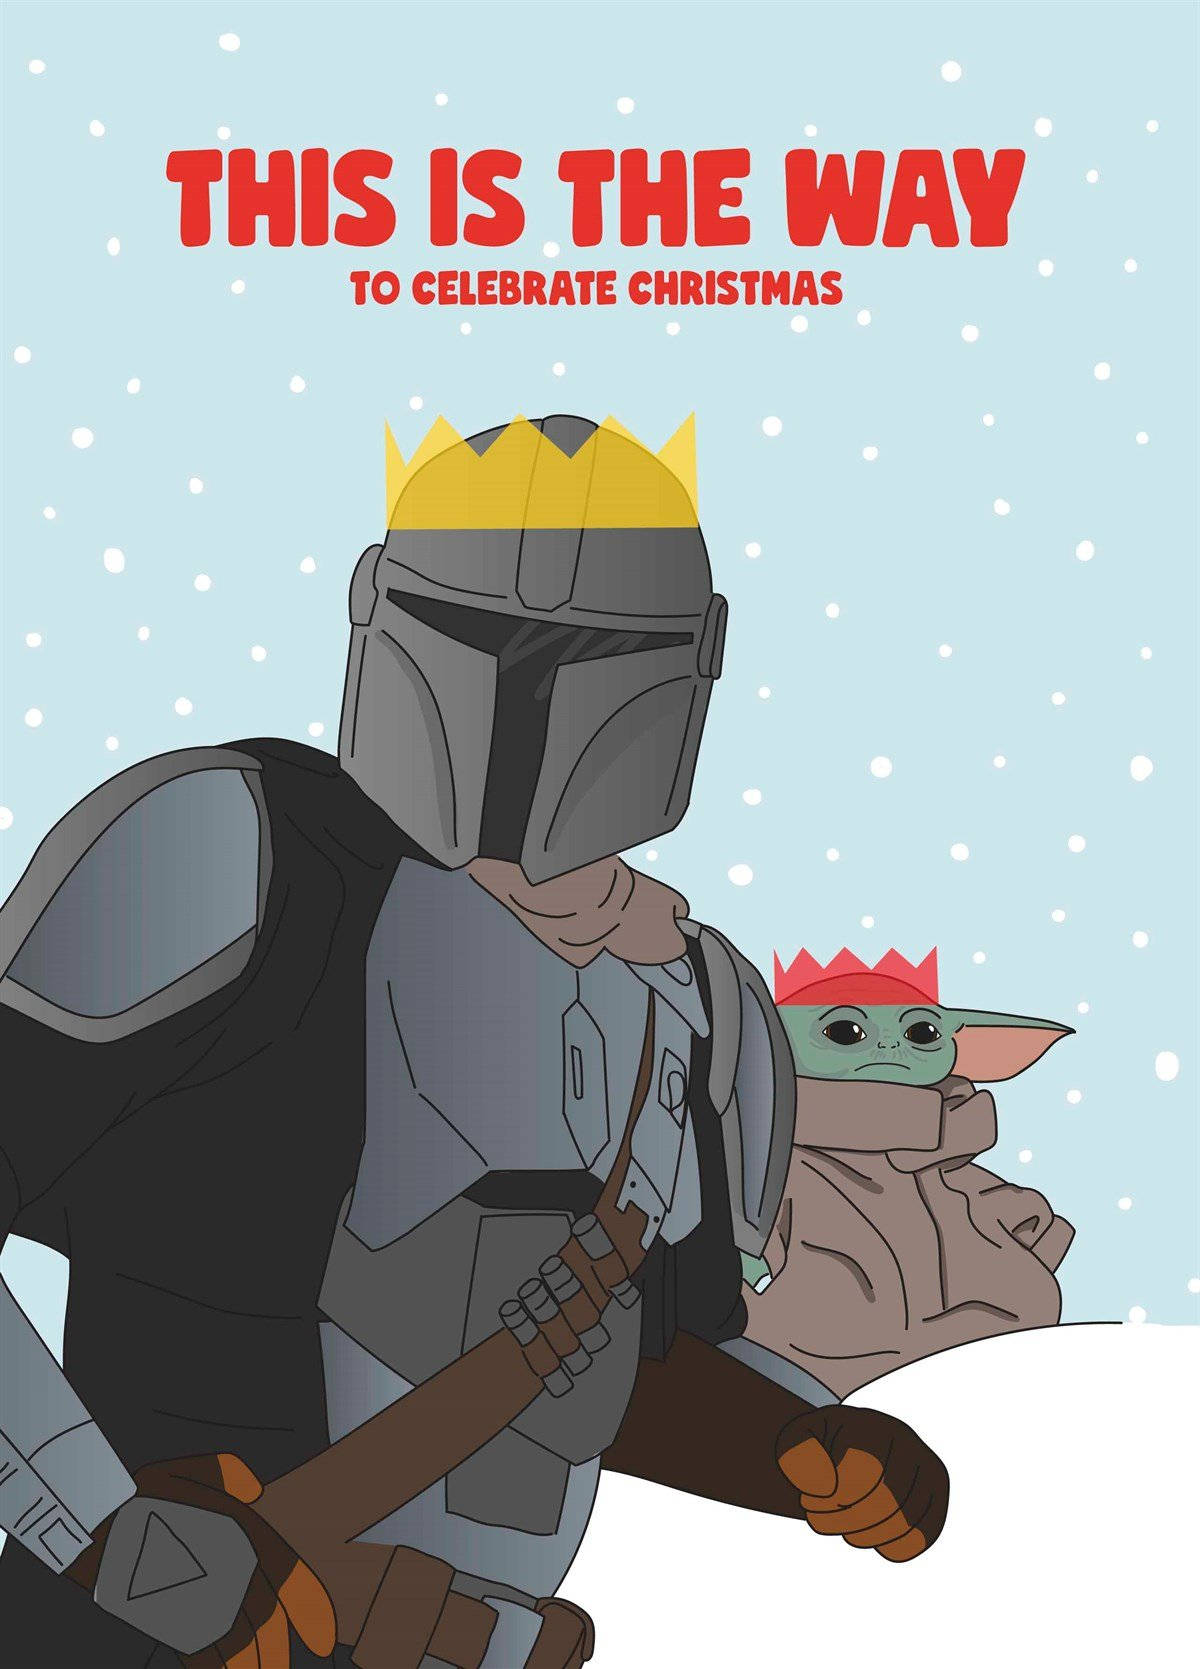 "Celebrate the Holidays with a Star Wars Themed Christmas" Wallpaper